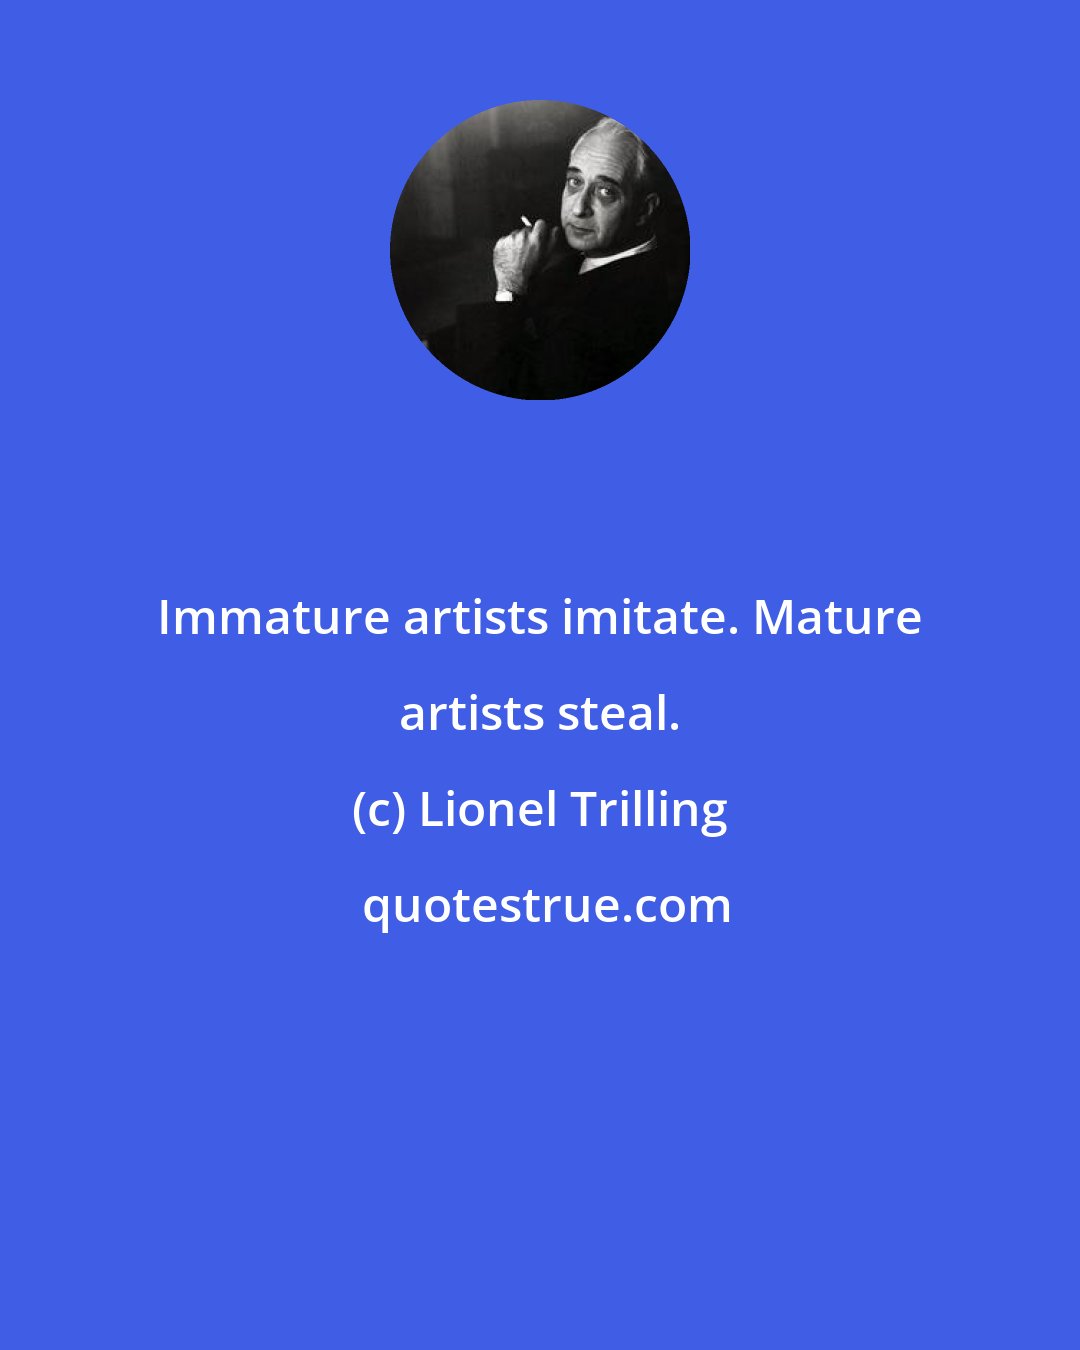 Lionel Trilling: Immature artists imitate. Mature artists steal.